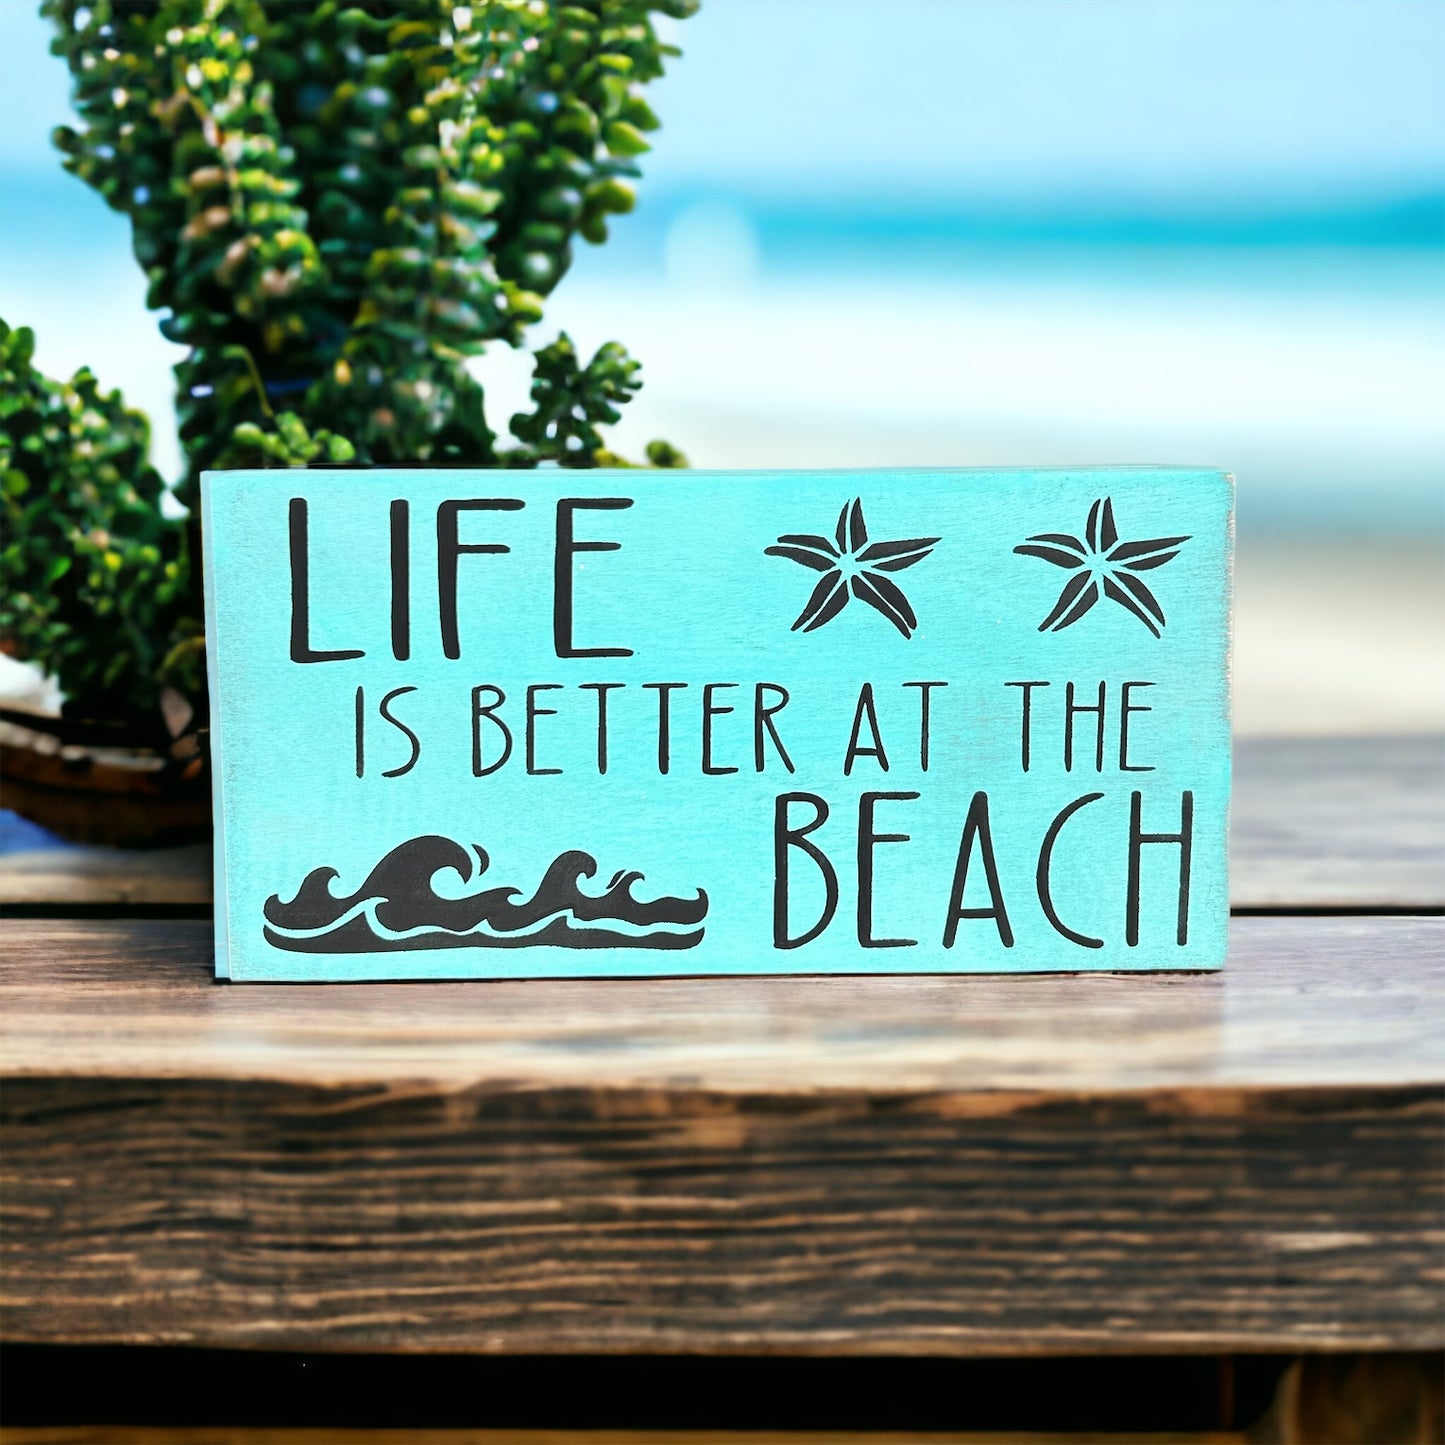 "Life is better at the beach" wood sign